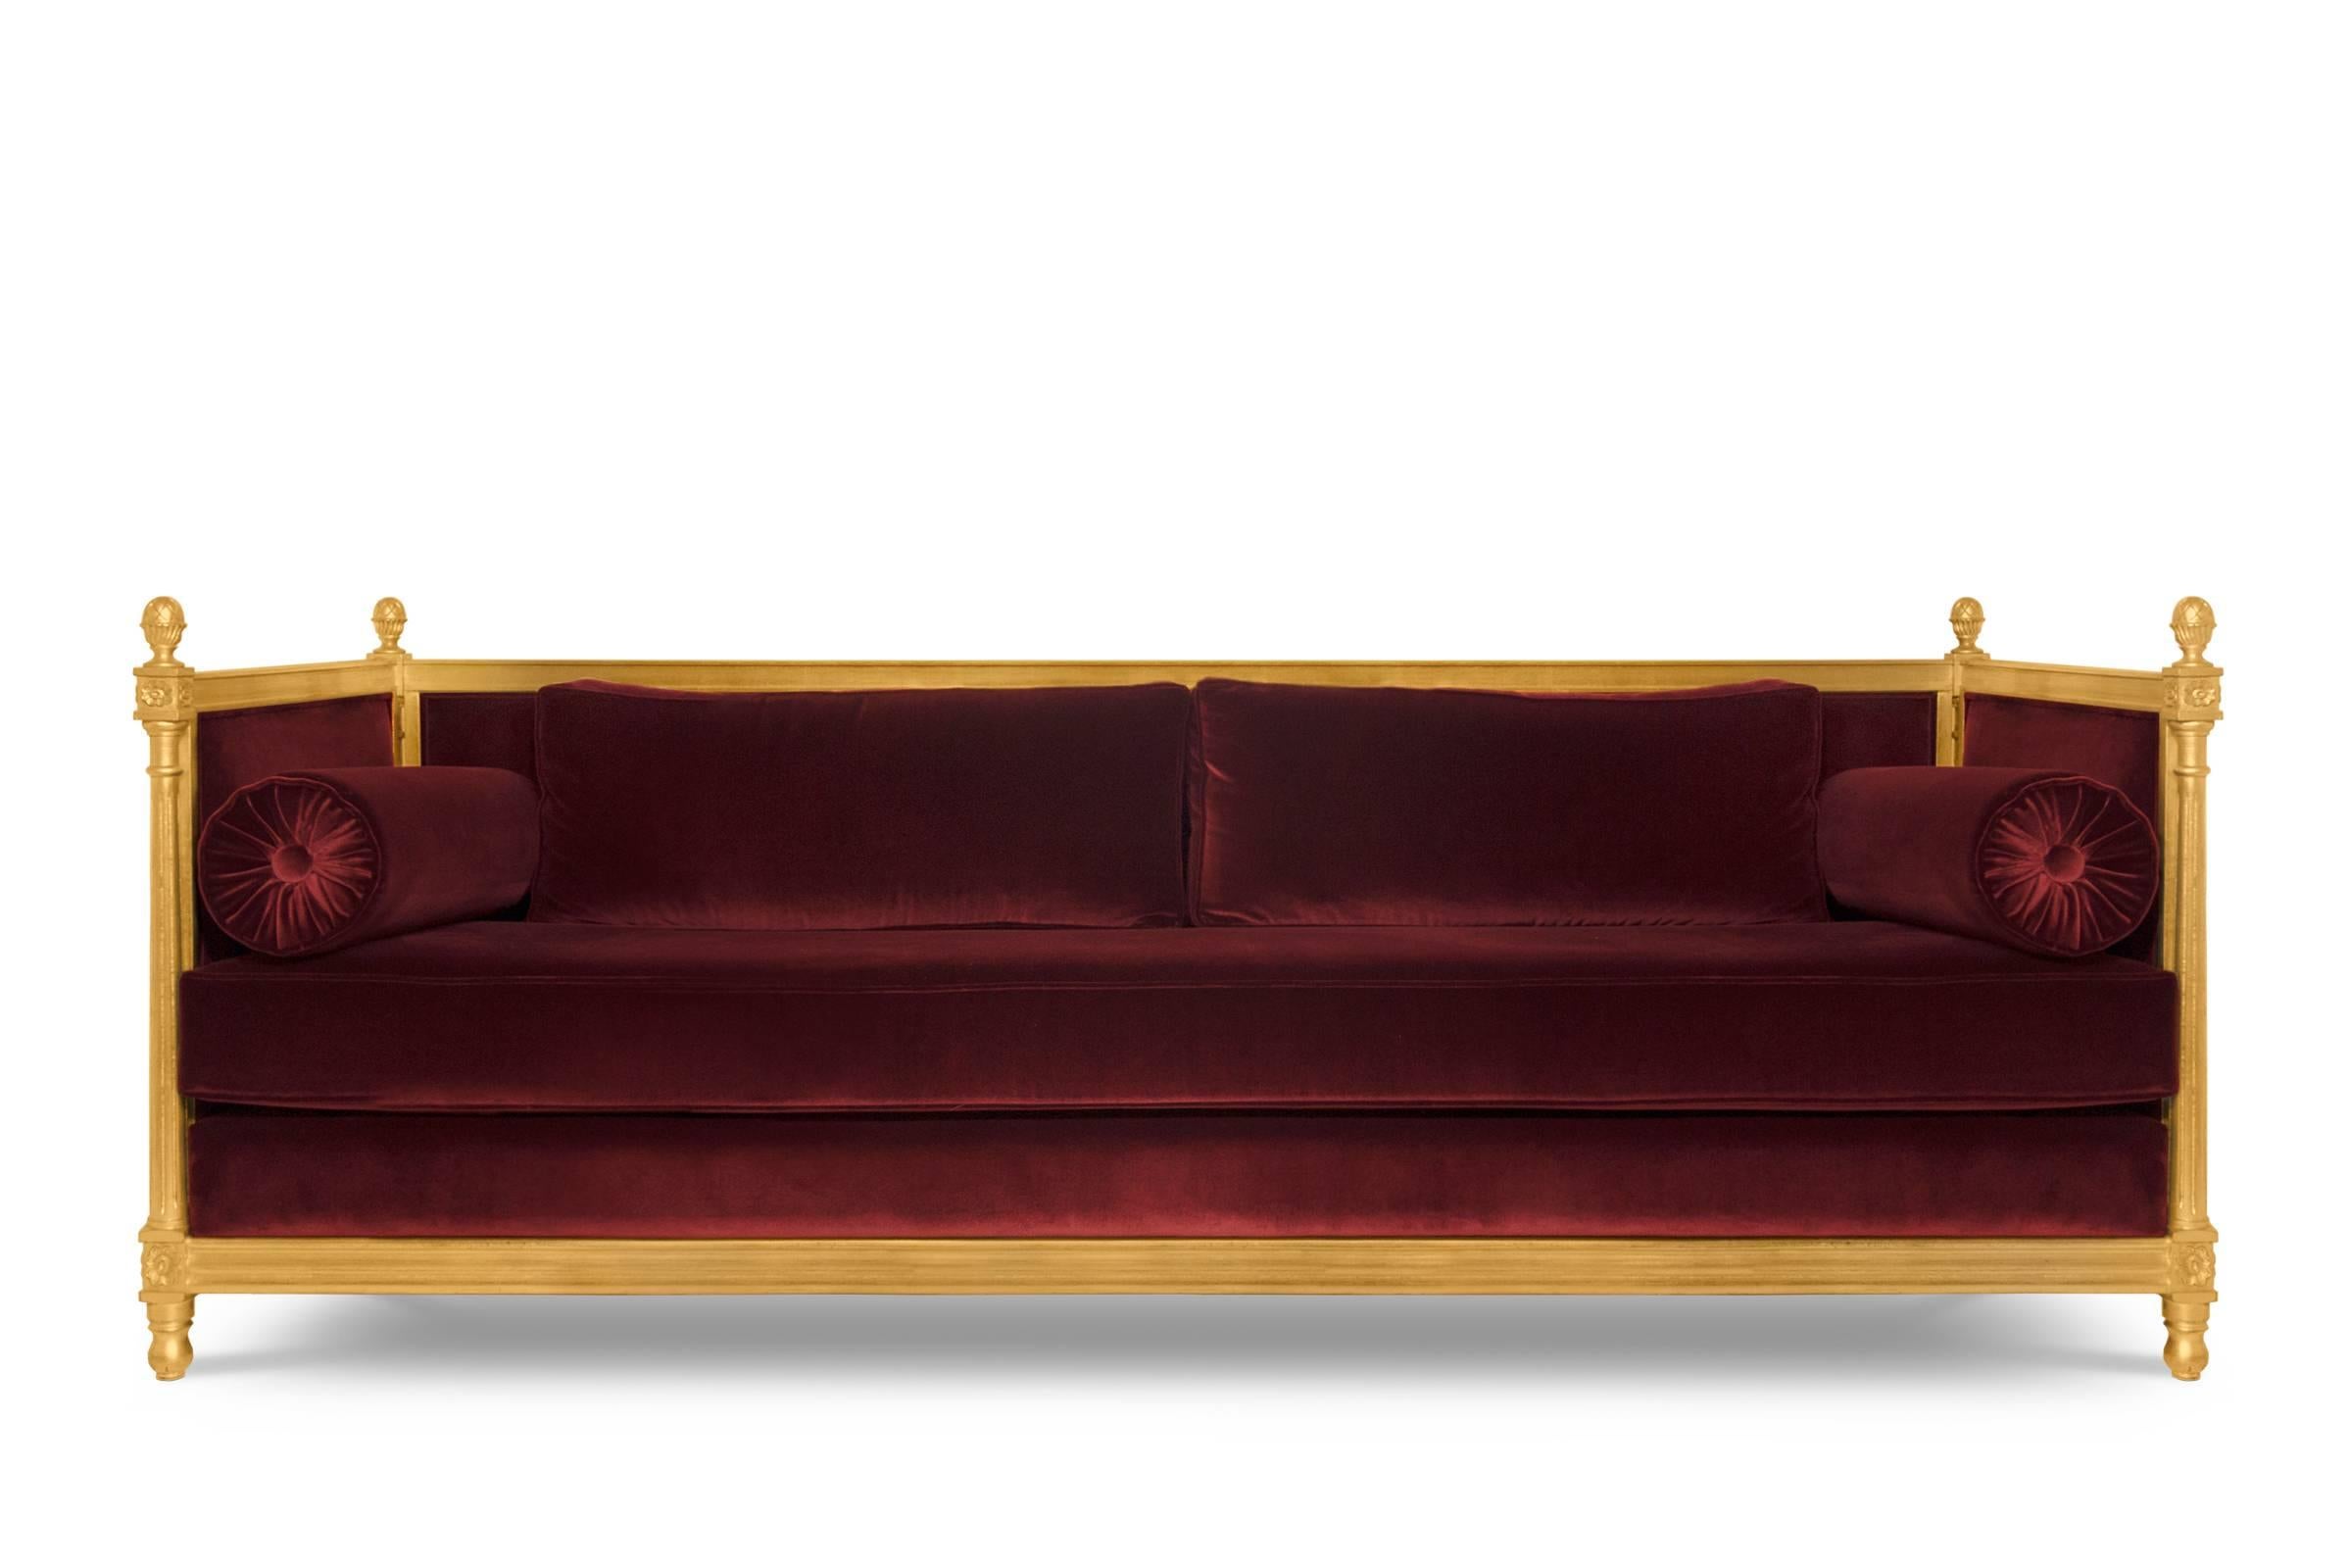 Sofa new castle with cotton velvet fabric and
aged golden leaf with gloss varnish. Available
in red, maroon, green or black colors.
